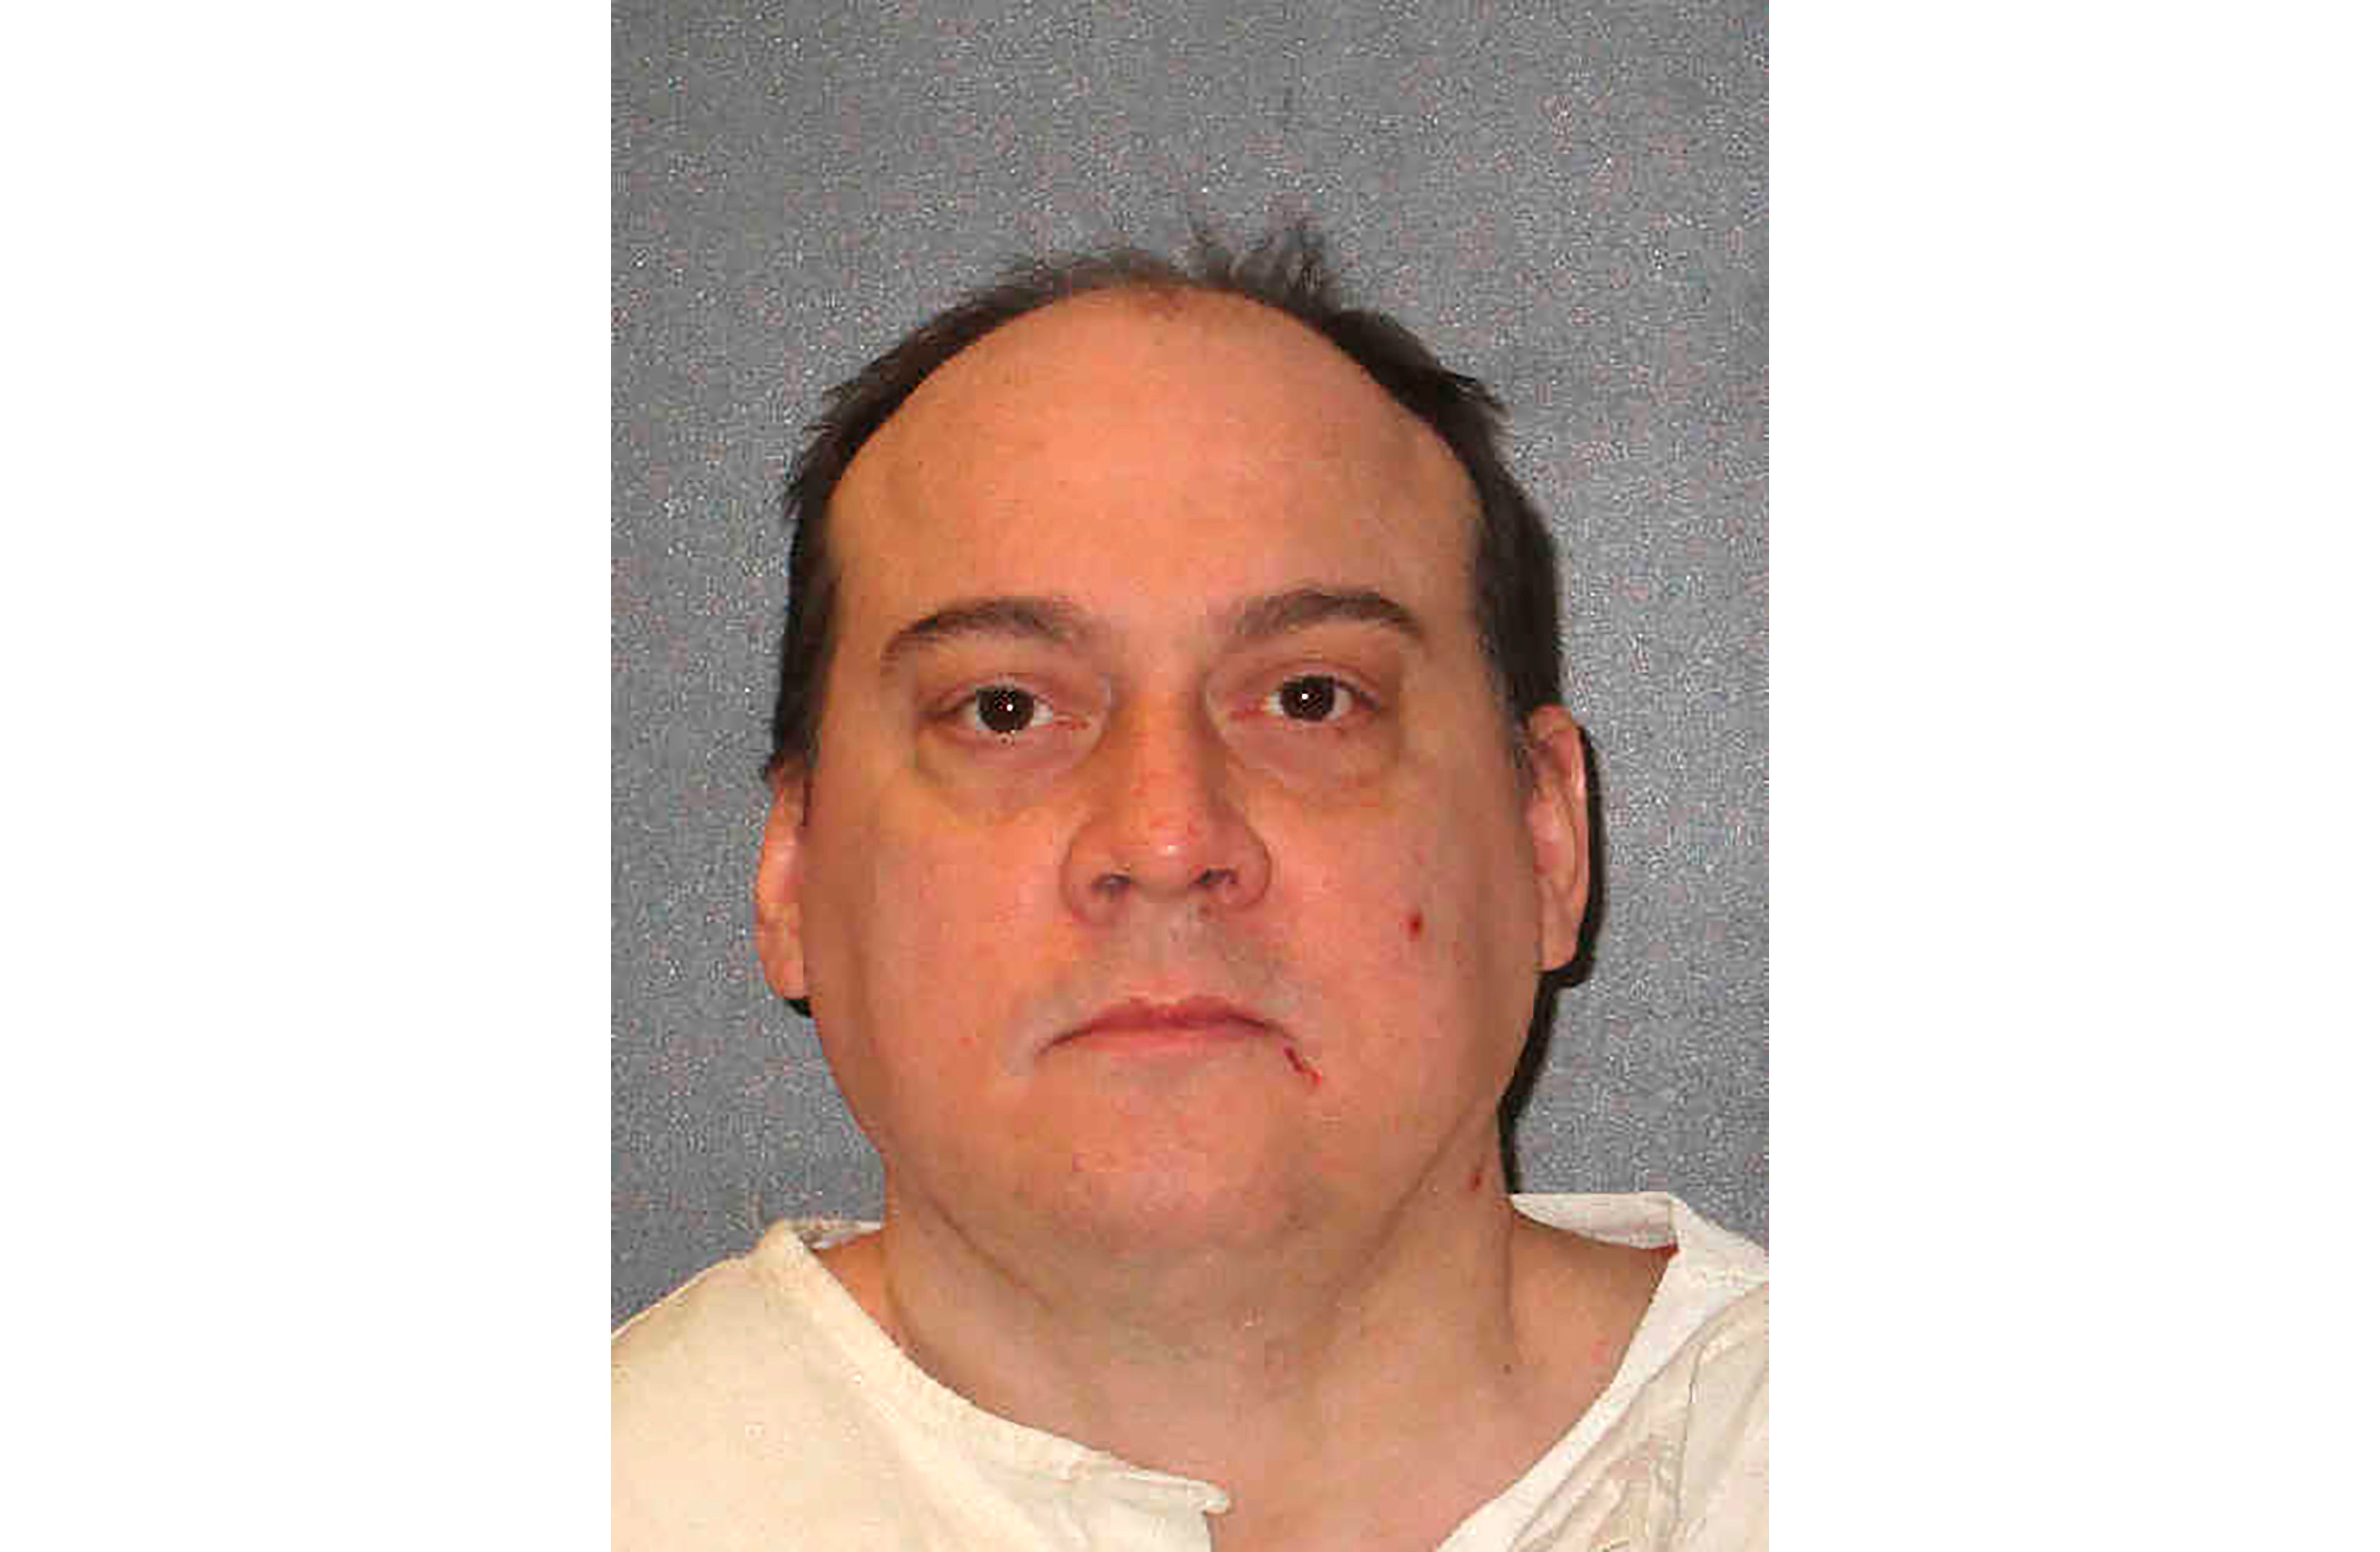 Texas executed death row inmate John Hummel on Wednesday, who brutally killed his wife, daughter, and father-in-law in 2009.